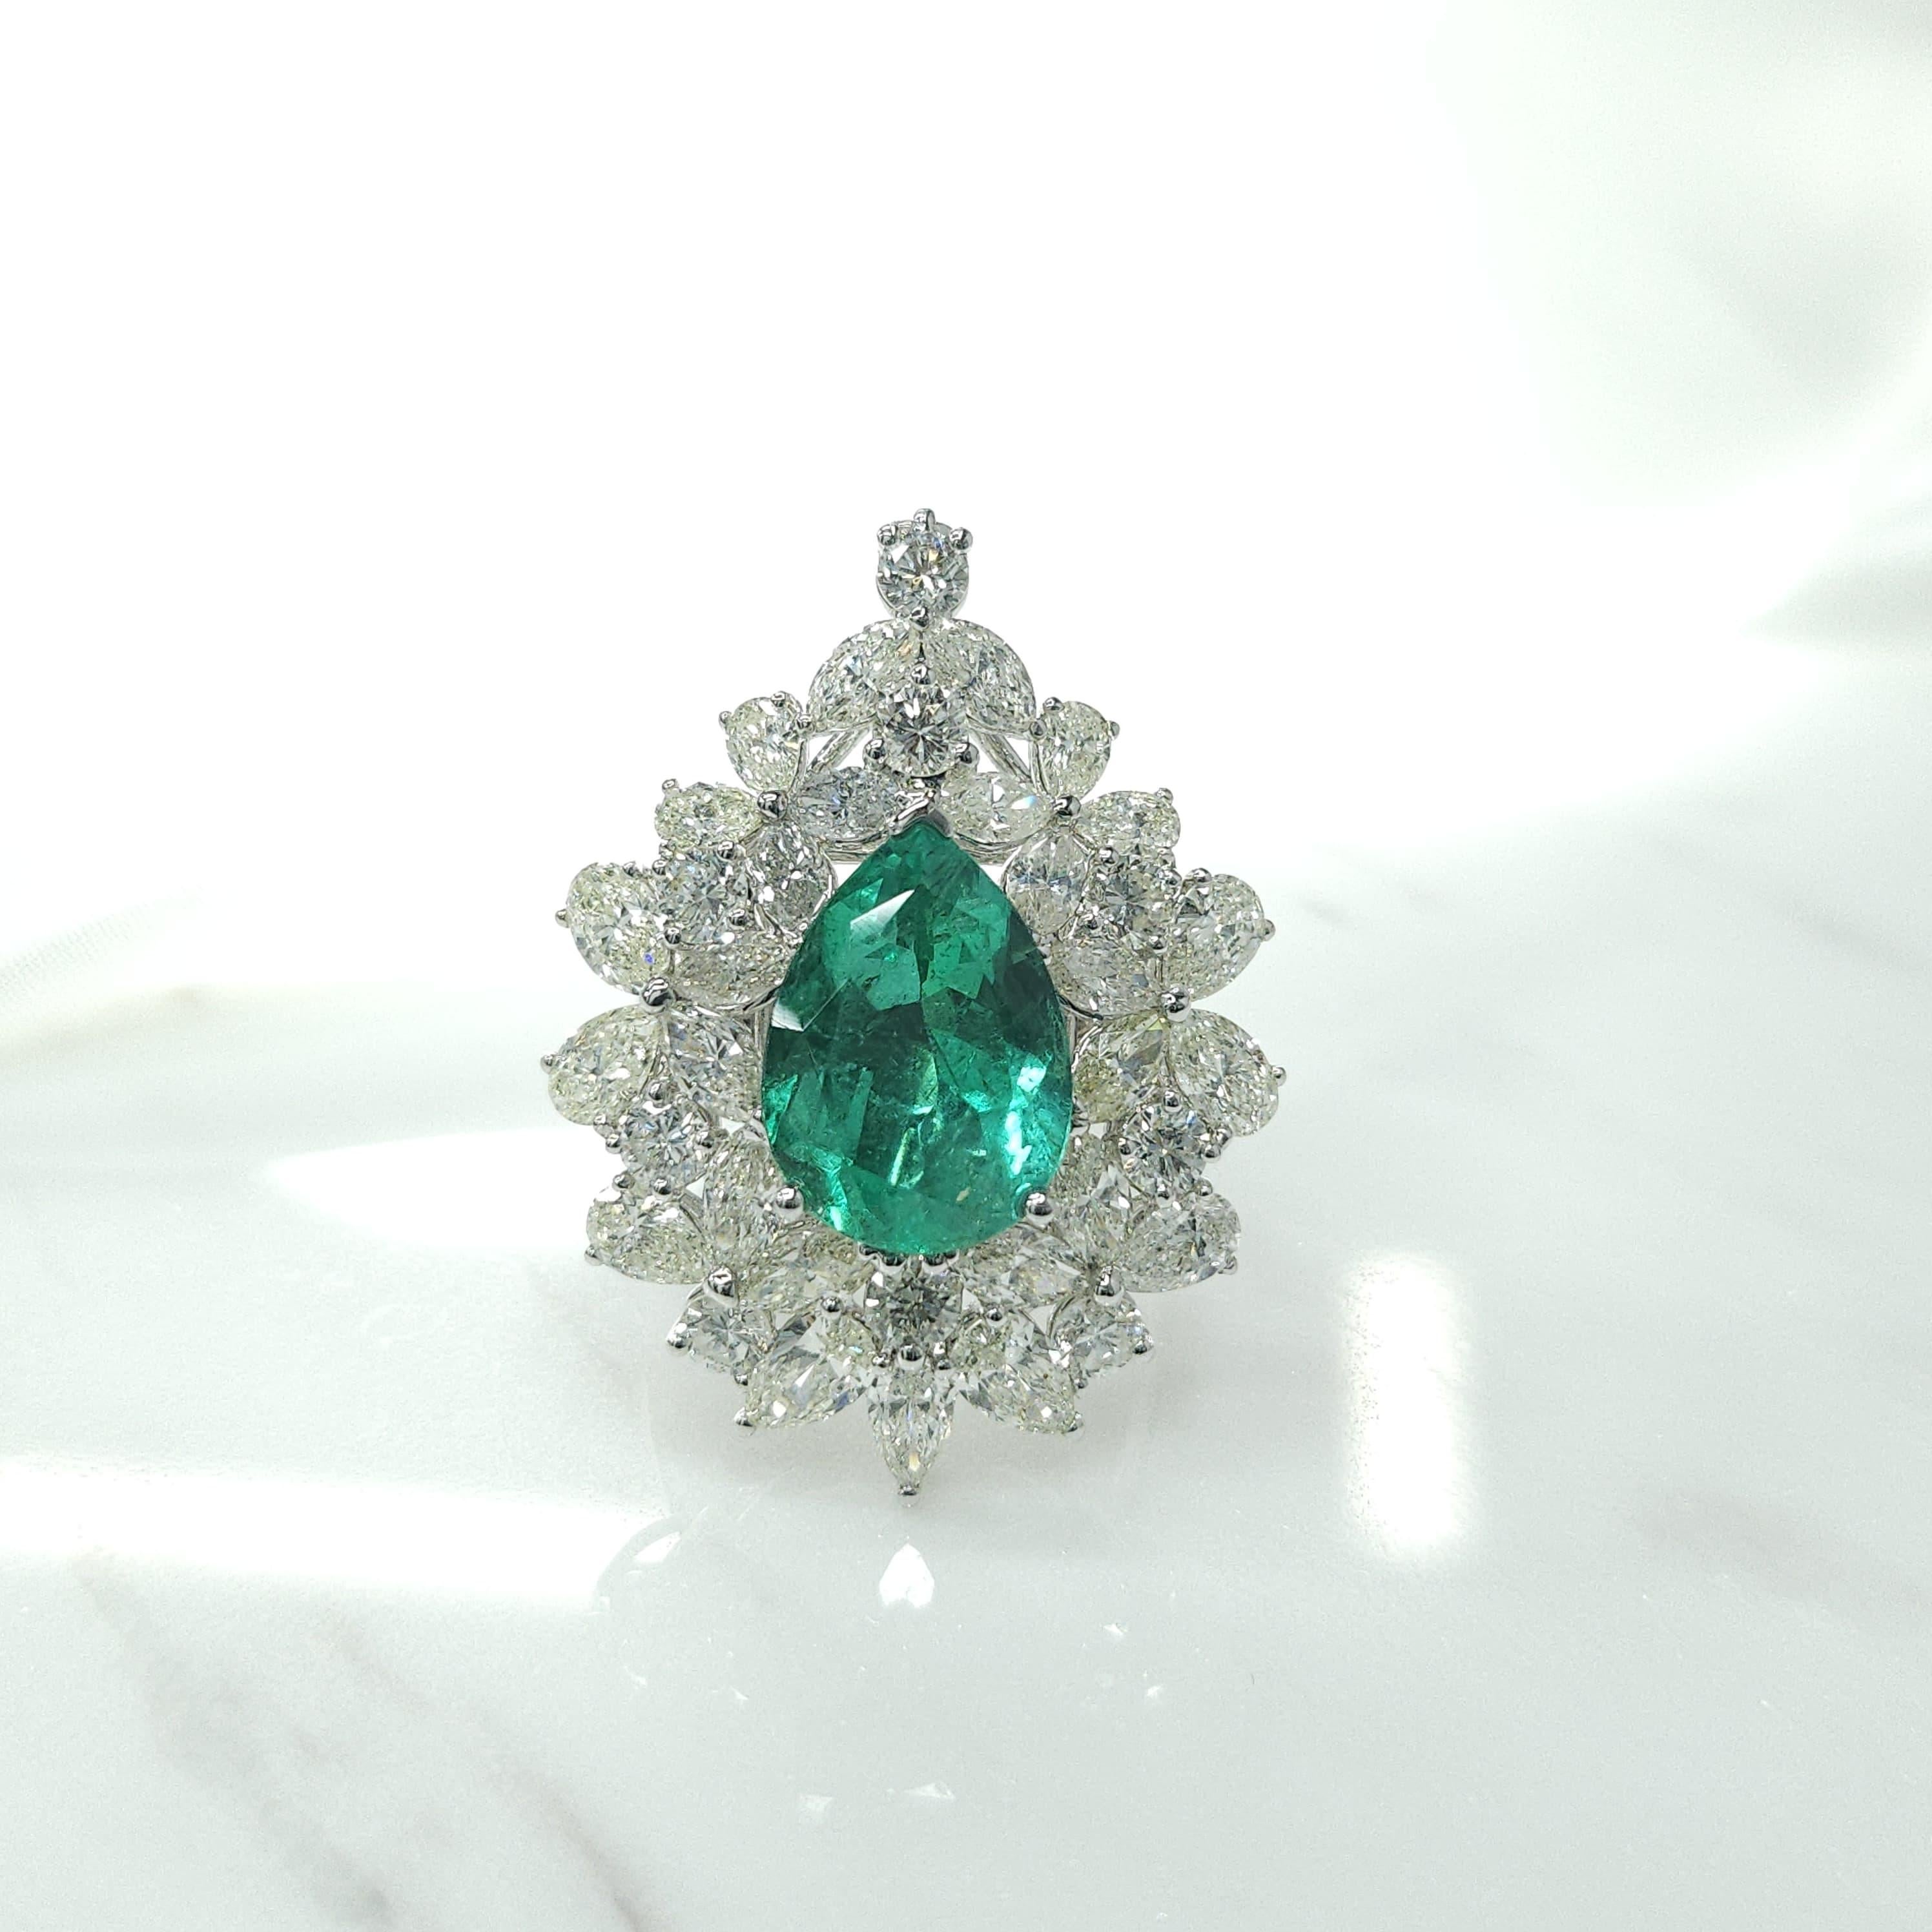 Introducing the breathtaking IGI Certified 4.19 Carat Colombian Emerald Diamond Ring Pendant 2-way in 18K White Gold, a true masterpiece of luxury and versatility. This extraordinary piece showcases a single pear-shaped Colombian emerald in an